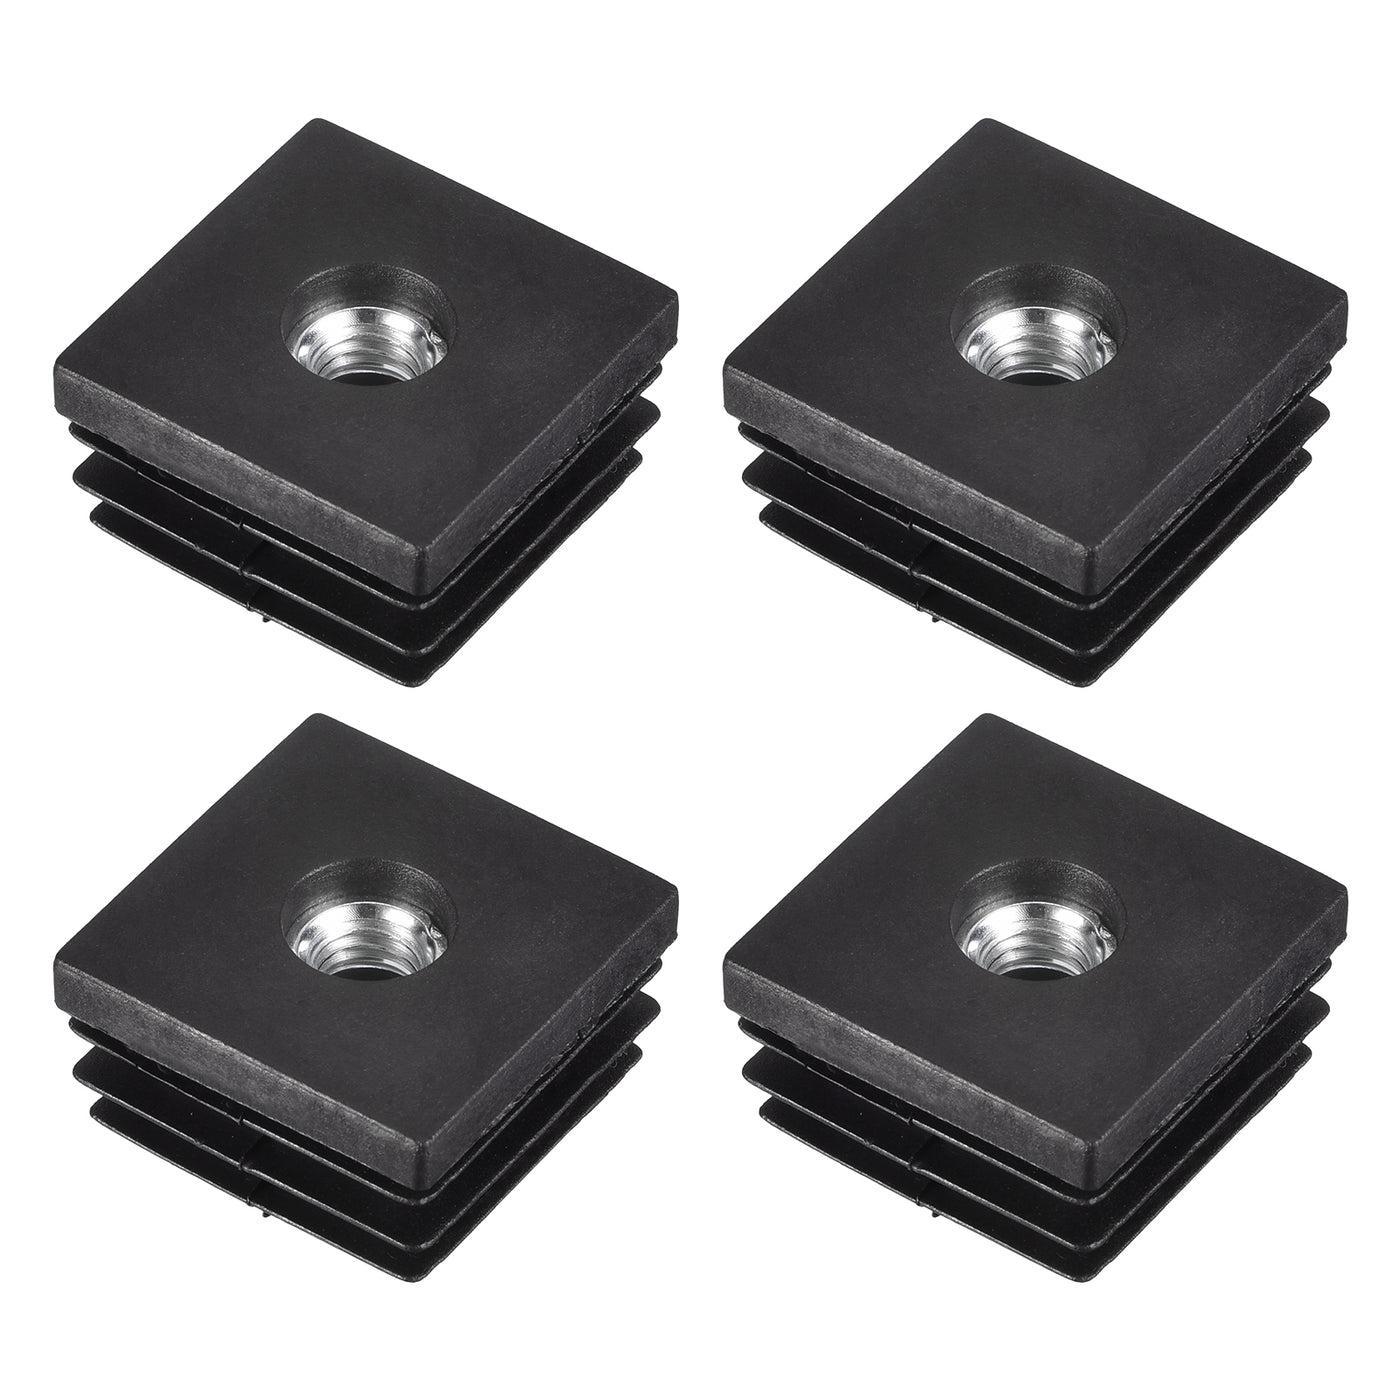 uxcell Uxcell 4Pcs 1.18"x1.18" Caster Insert with Thread, Square M8 Thread for Furniture